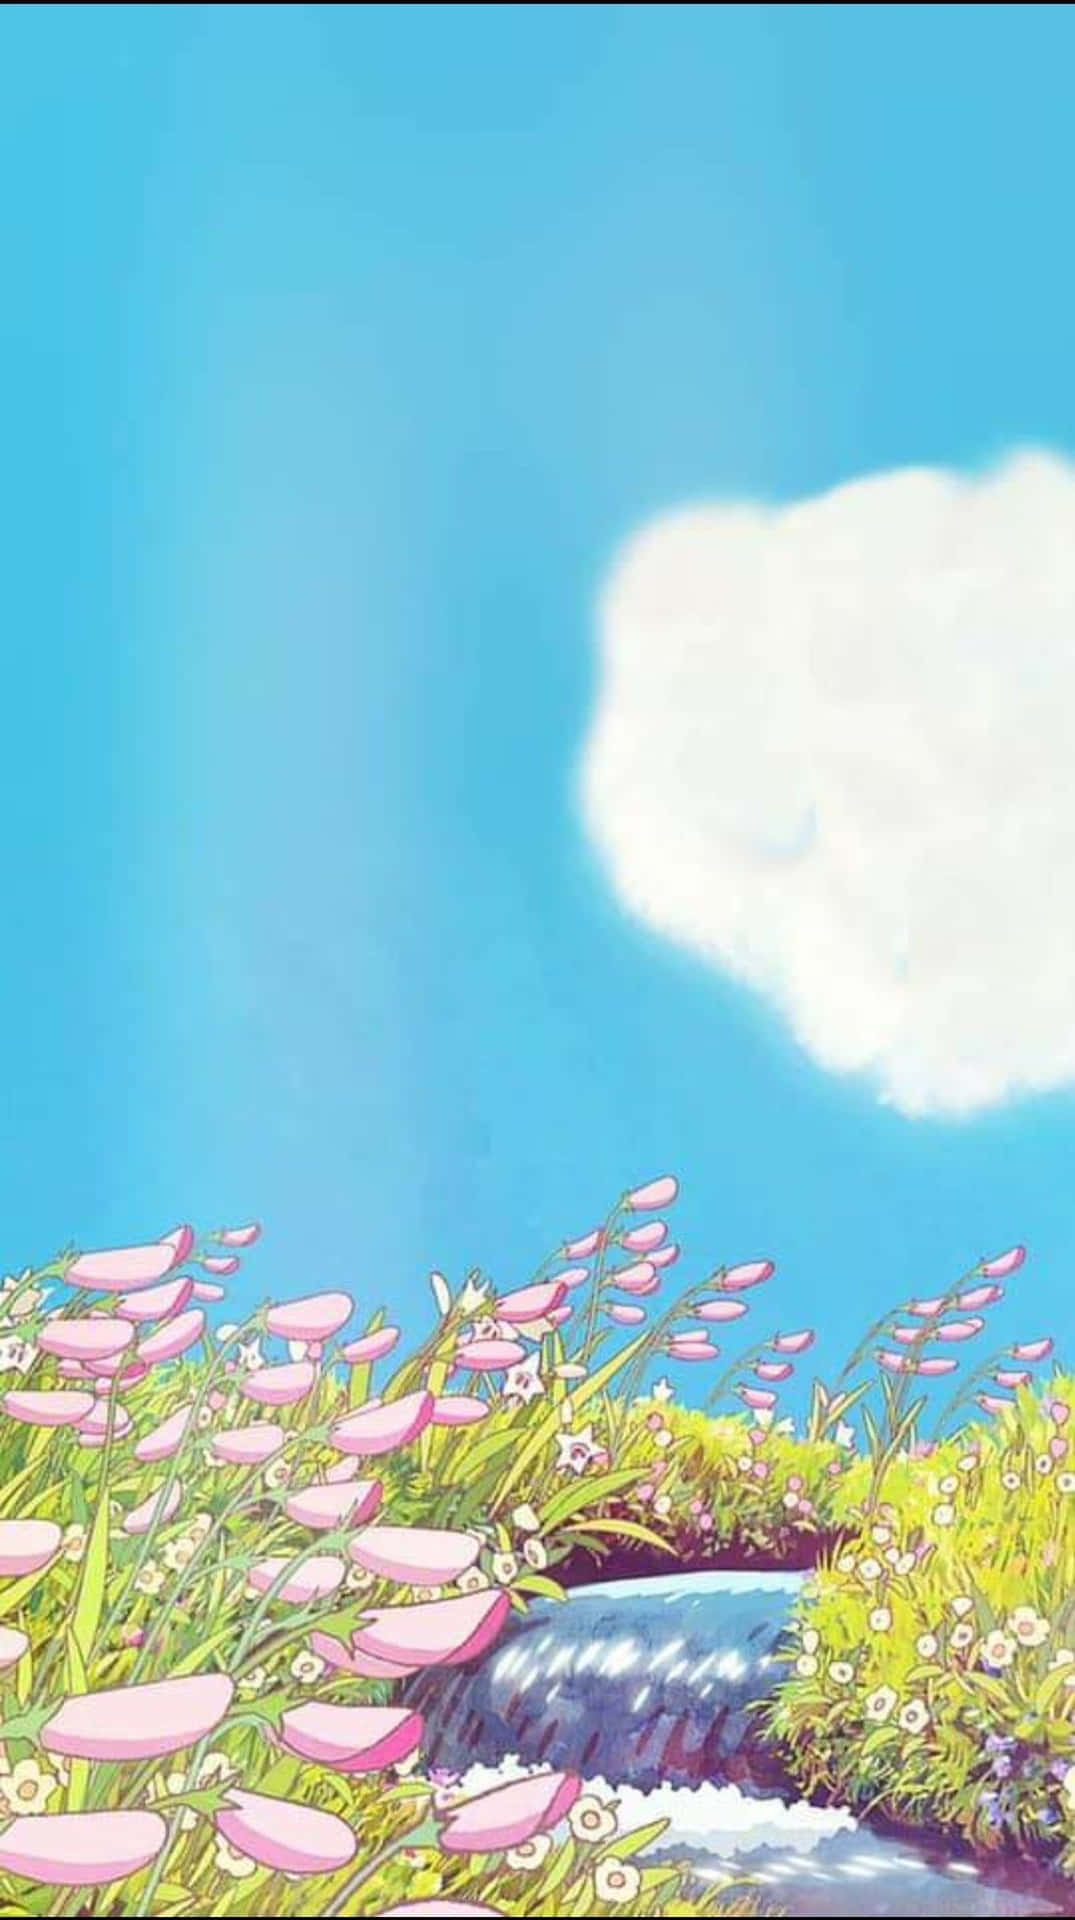 Breathtaking nature inspired by Ghibli animation Wallpaper